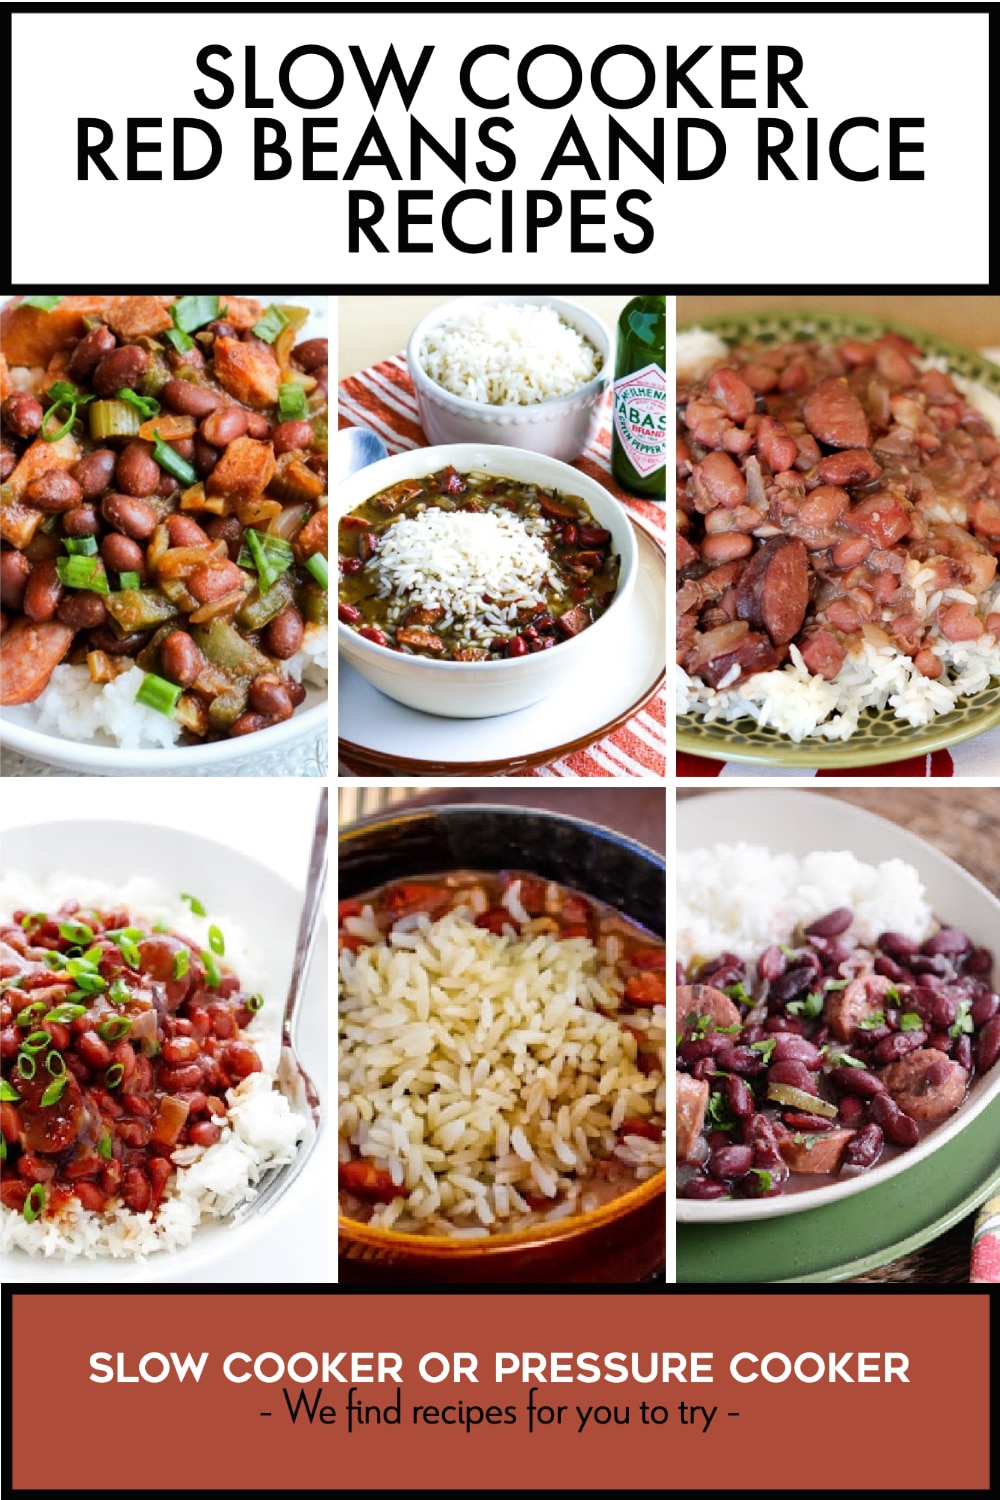 Pinterest image of Slow Cooker Red Beans and Rice Recipes